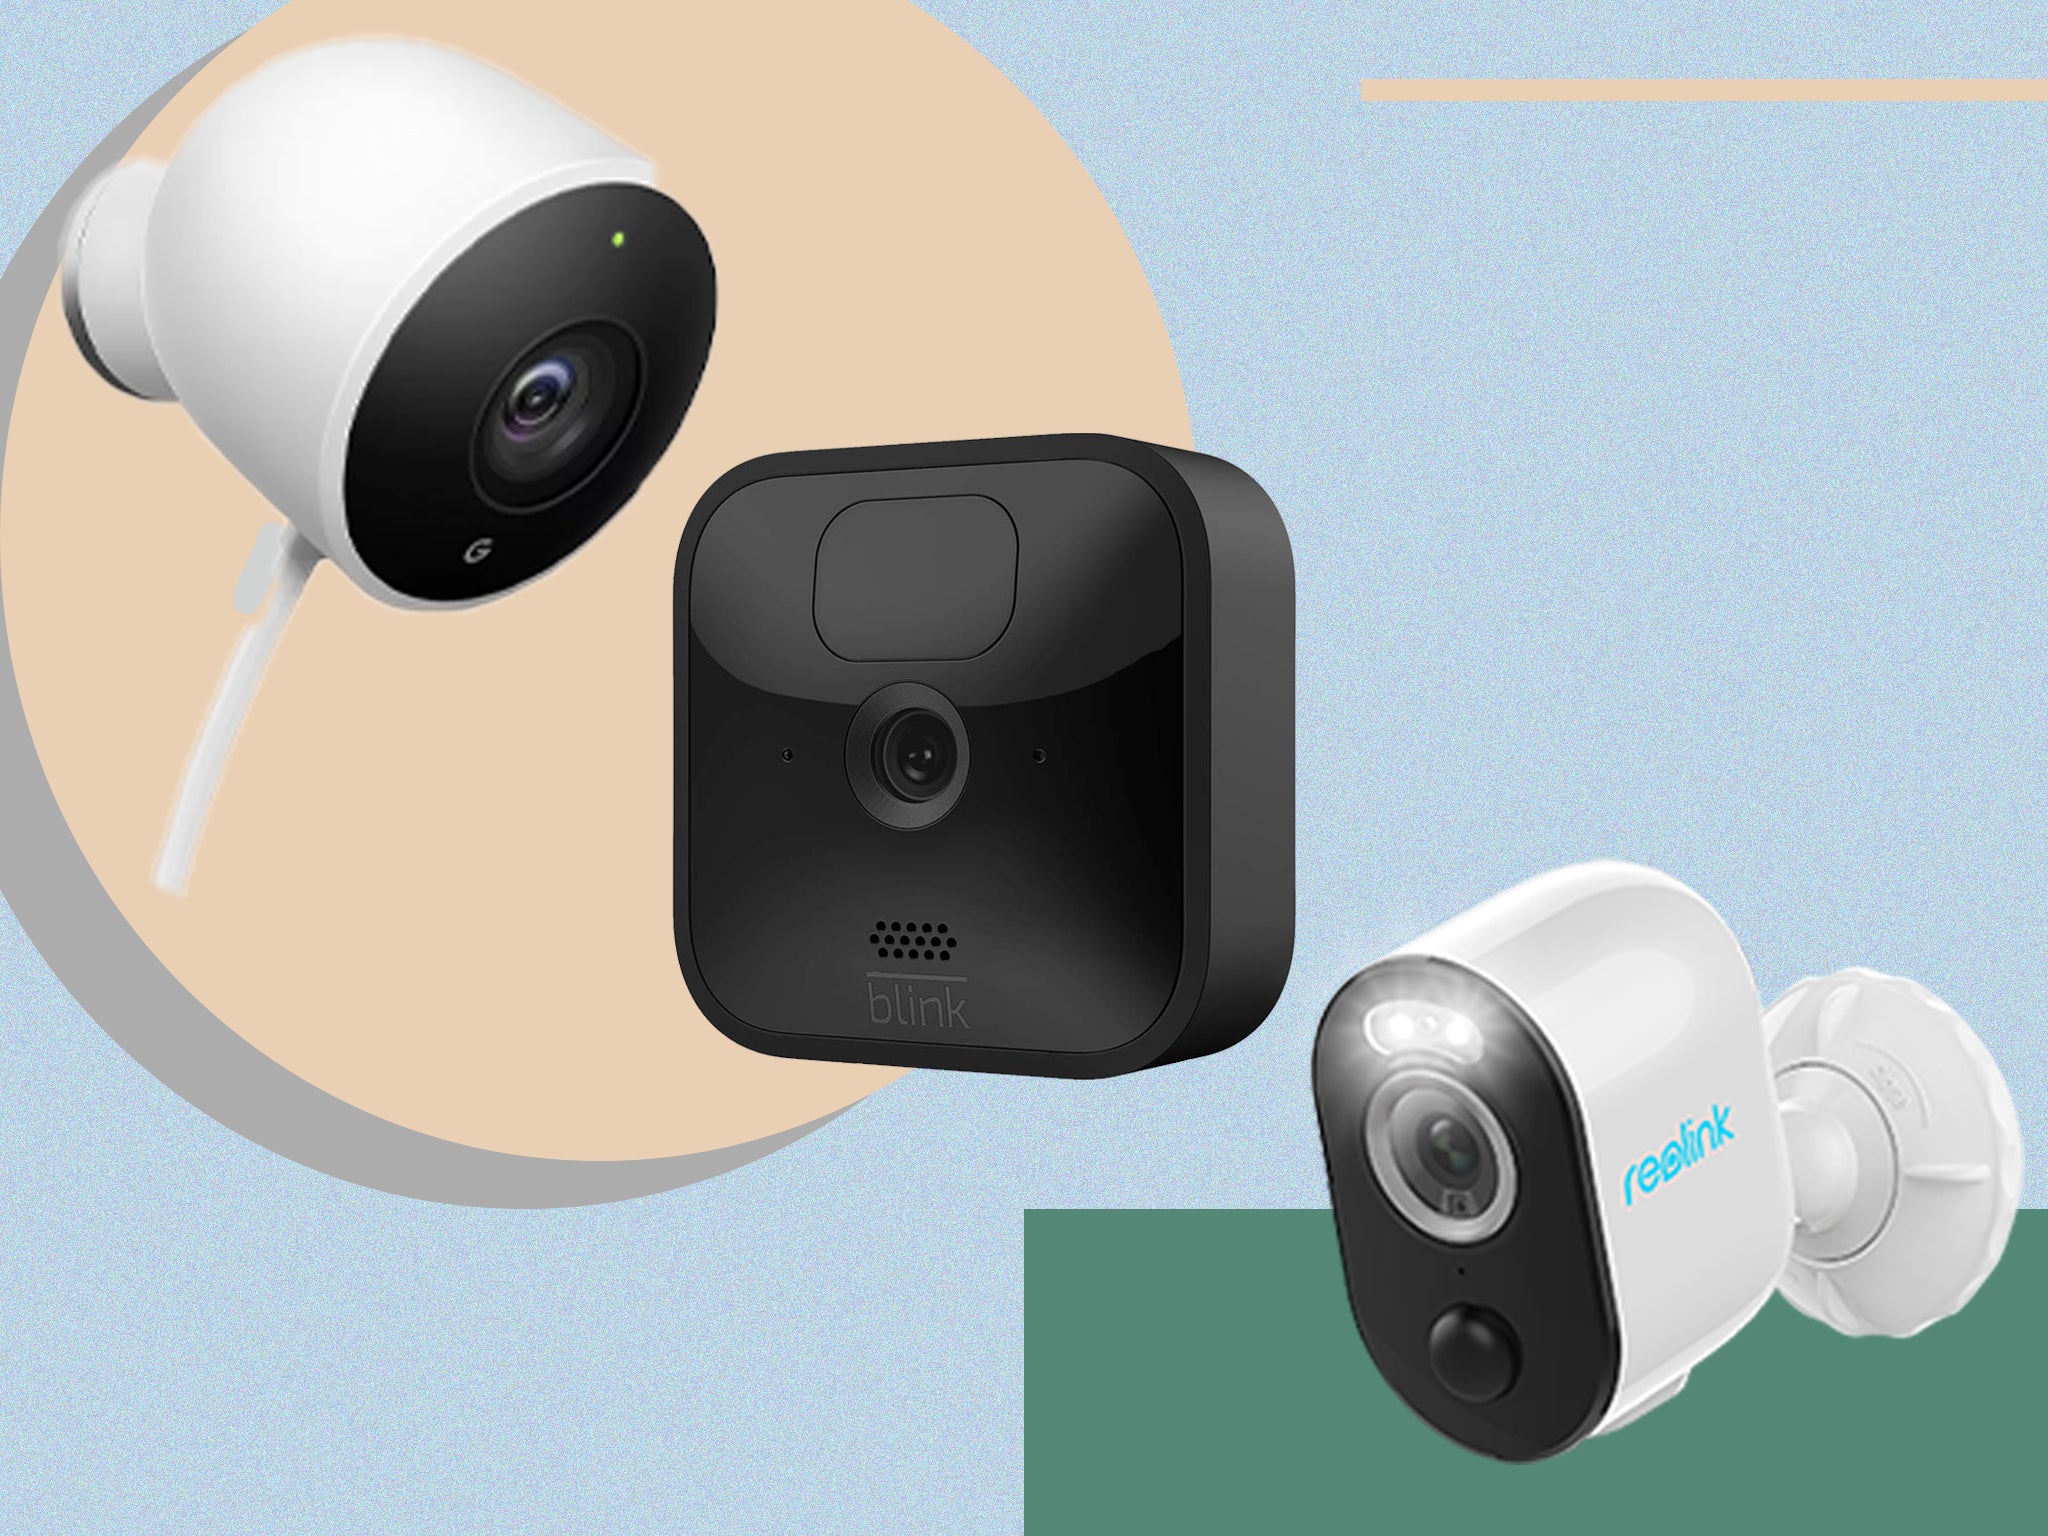 6 best home security cameras: Indoor and outdoor setups for peace of mind